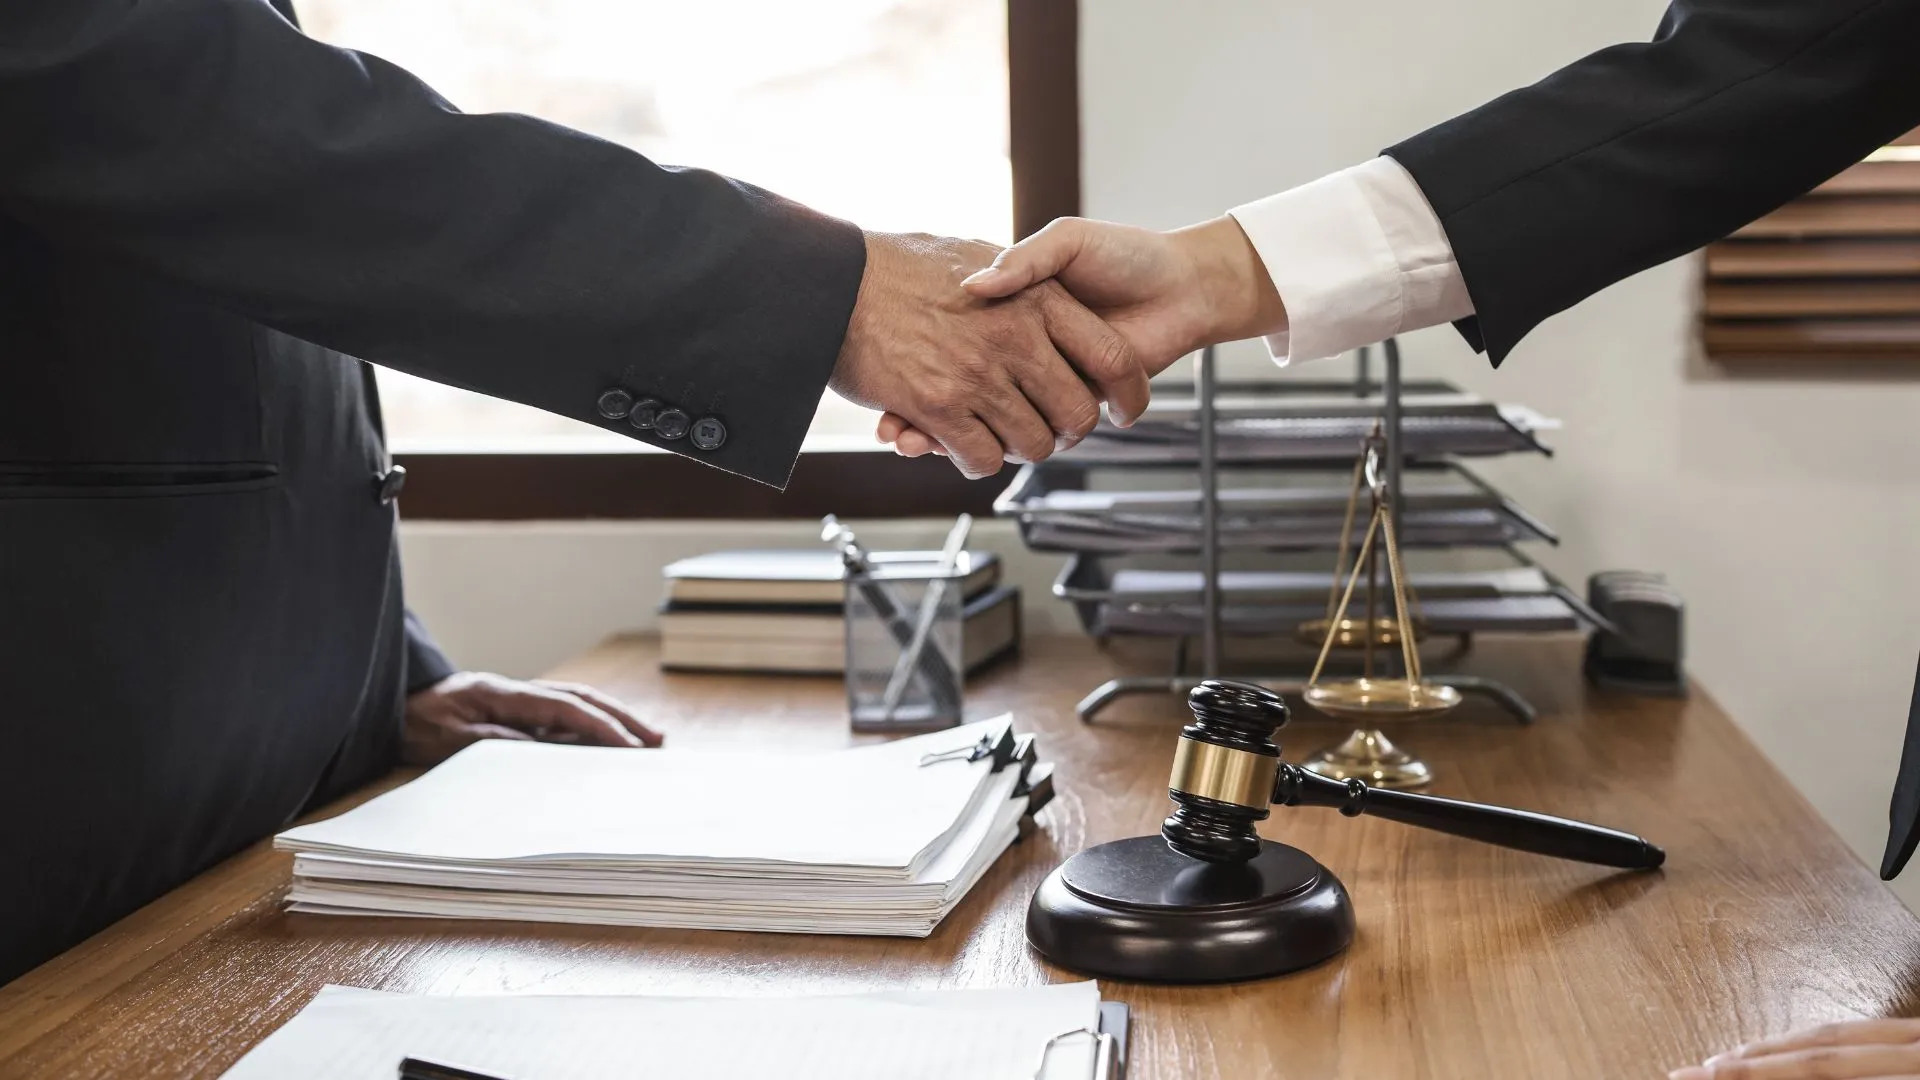 Two lawyers shake hands over a wooden office table. A justice scale and a gavel decorate the table.